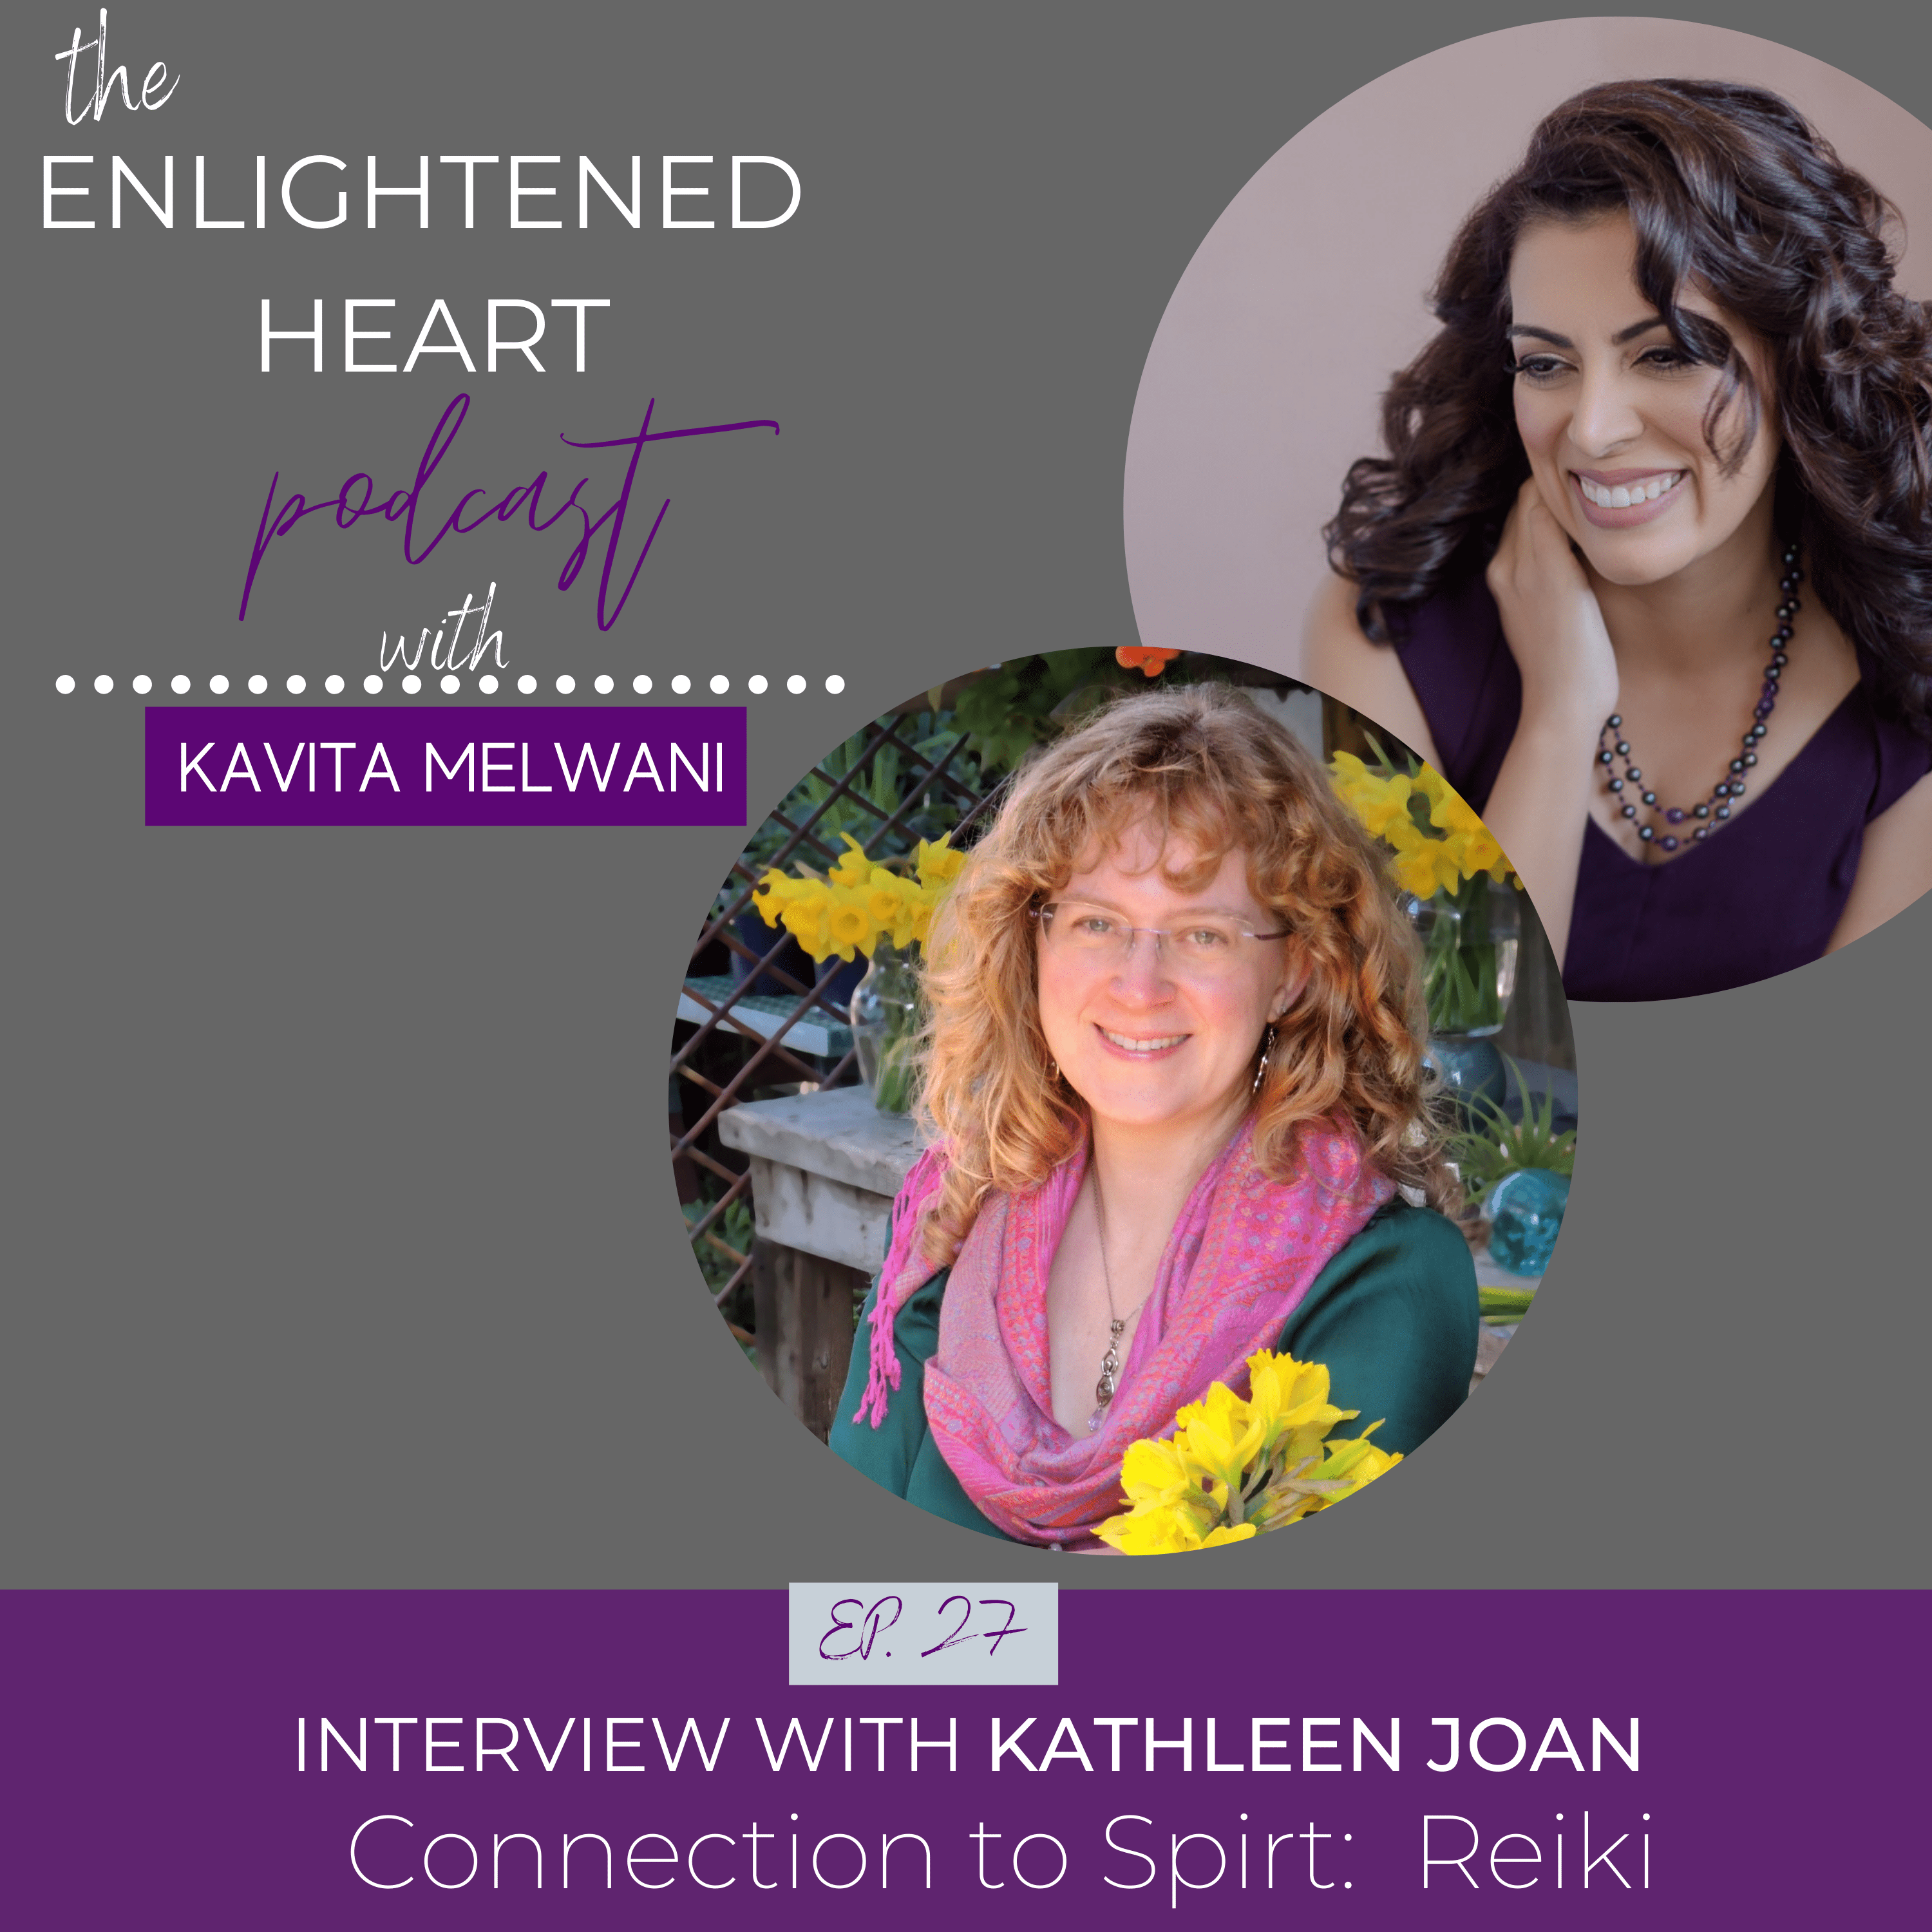 Connection to Spirit: Interview with Kathleen Joan